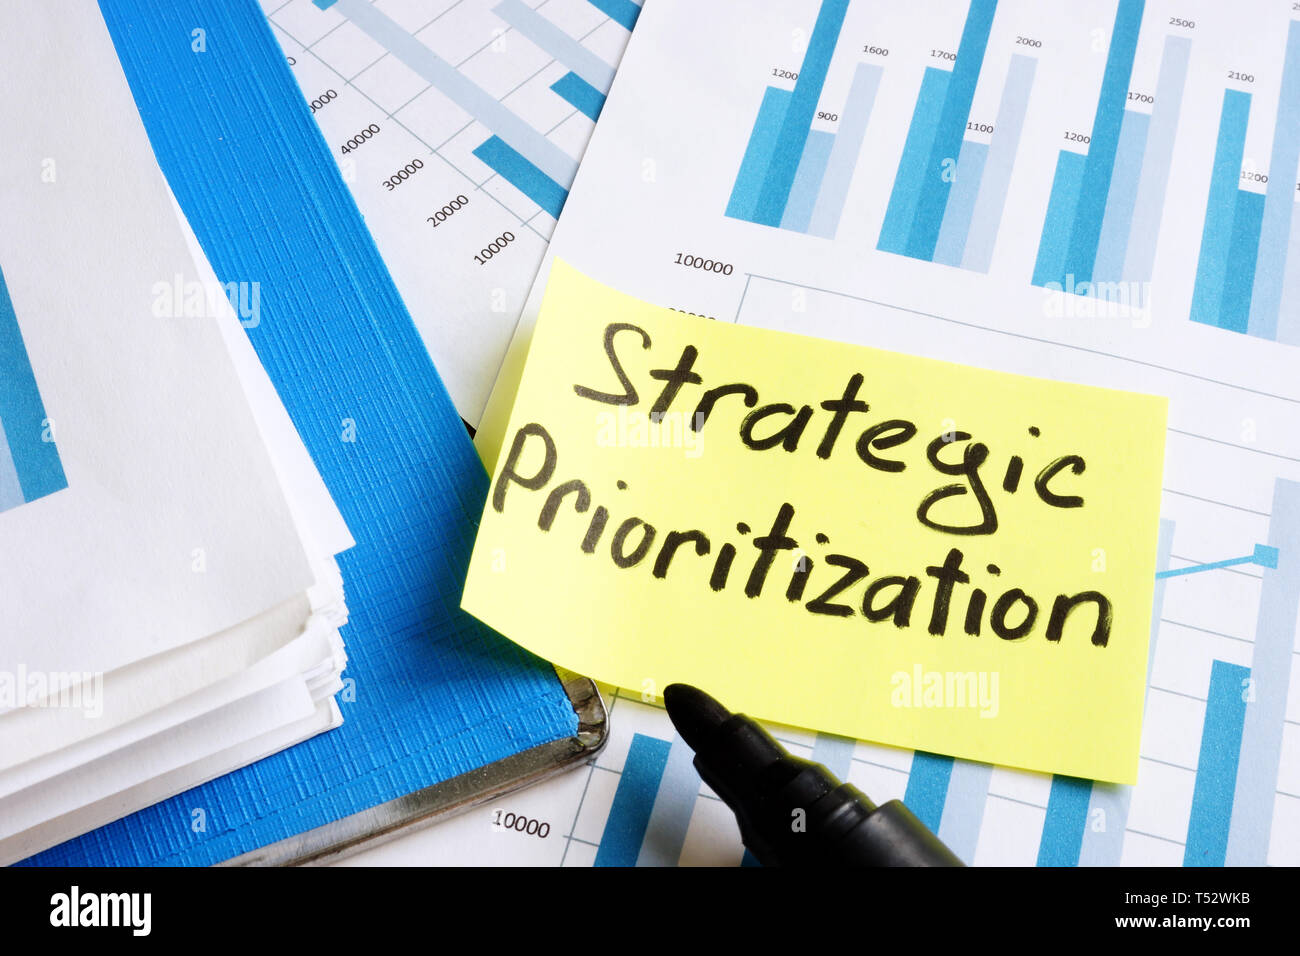 Strategic Prioritization concept. Documents and folder with papers. Stock Photo